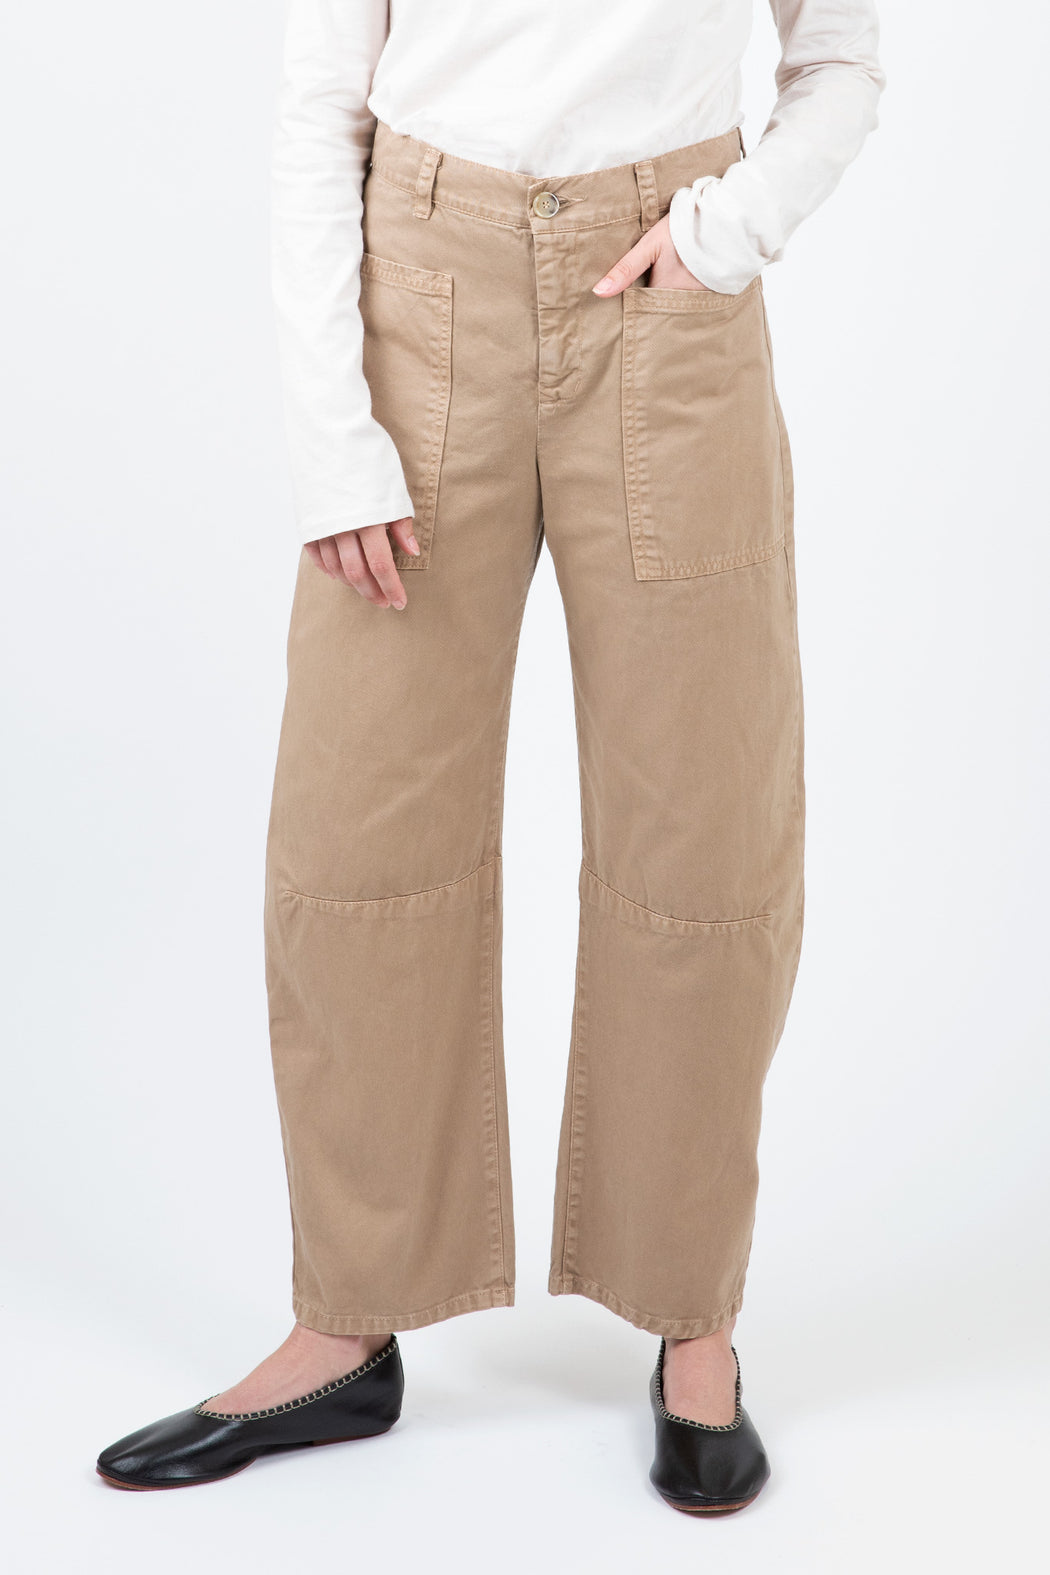 Velvet-Brylie-Twill-Pant-Pike